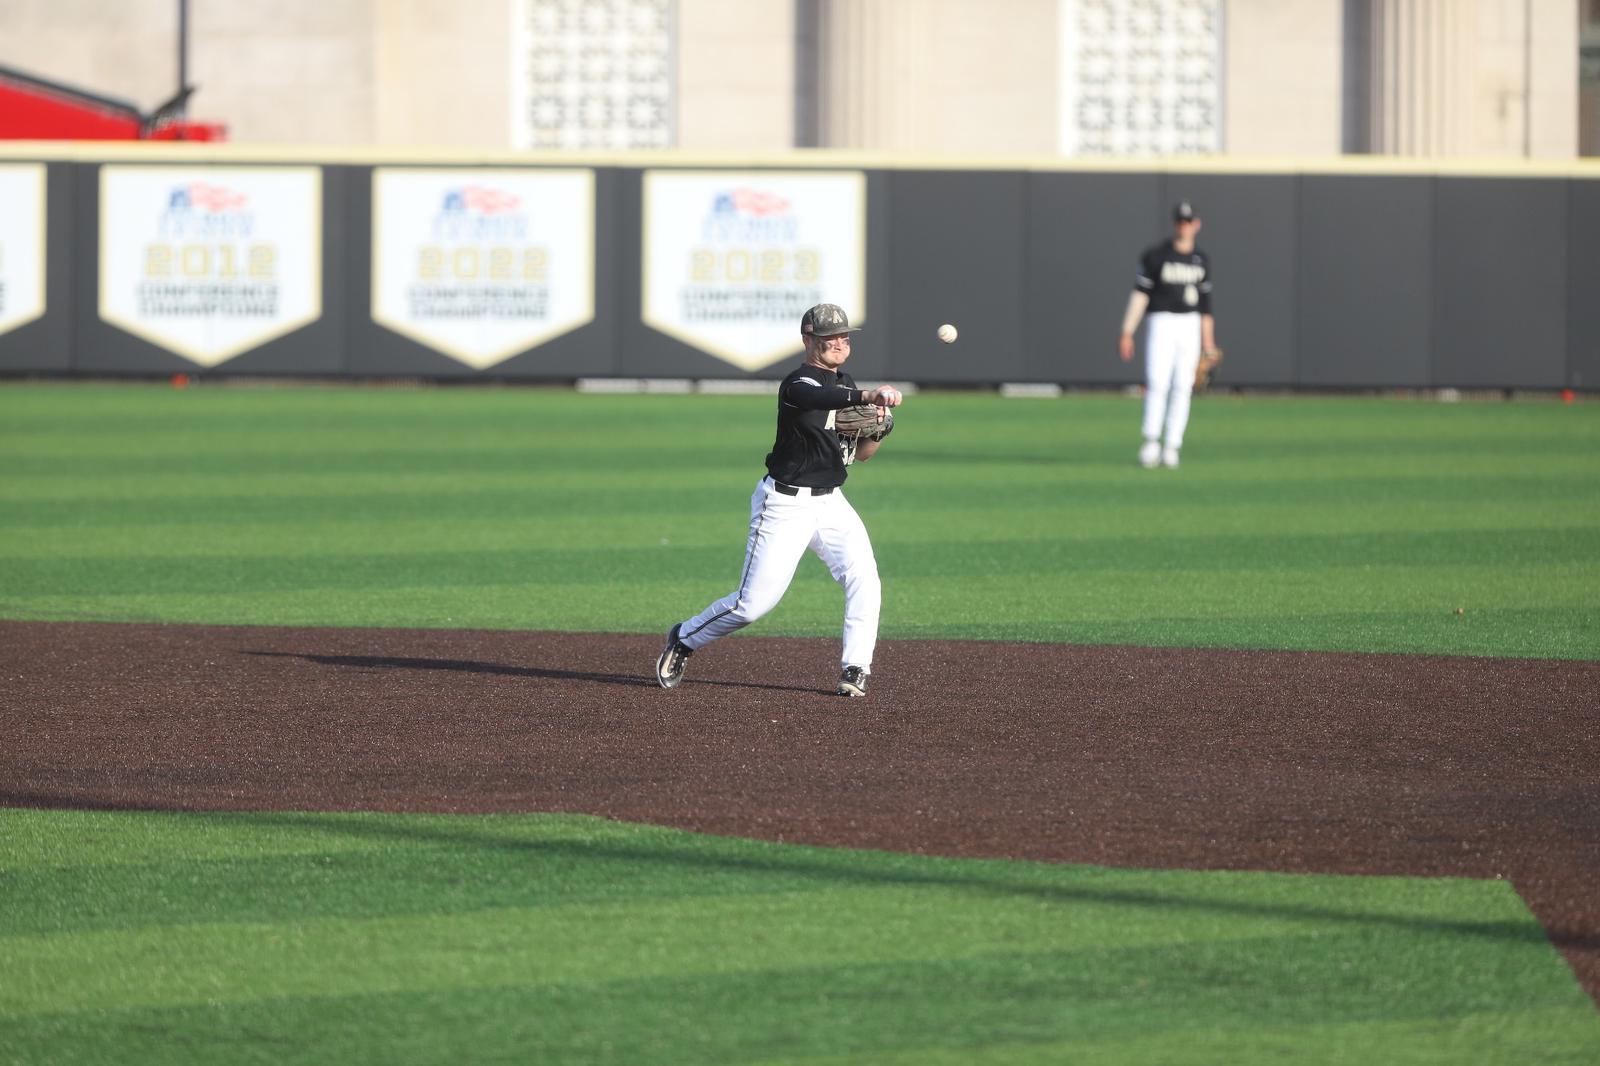 Army Baseball Dominates Marist with Defense, Pitching, and Patience in 6-1 Victory